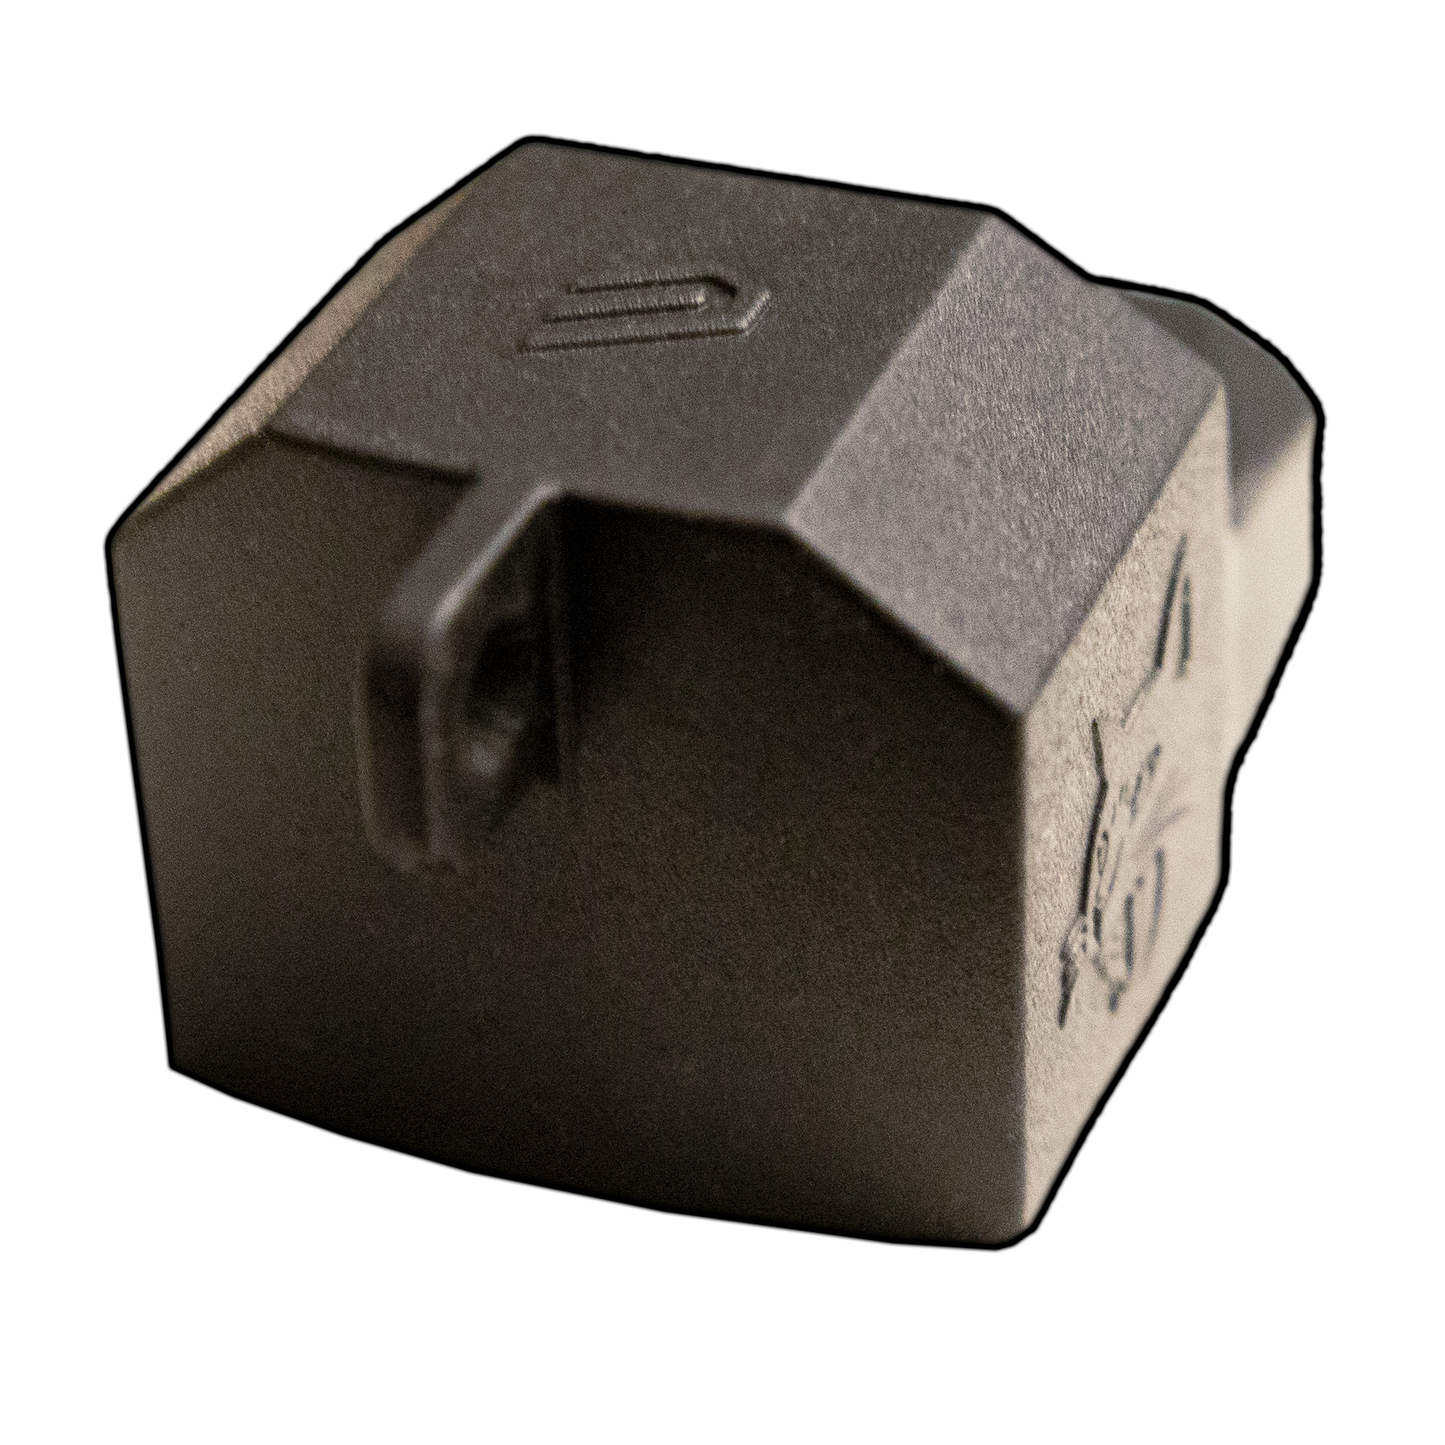 a black and white photo of a box